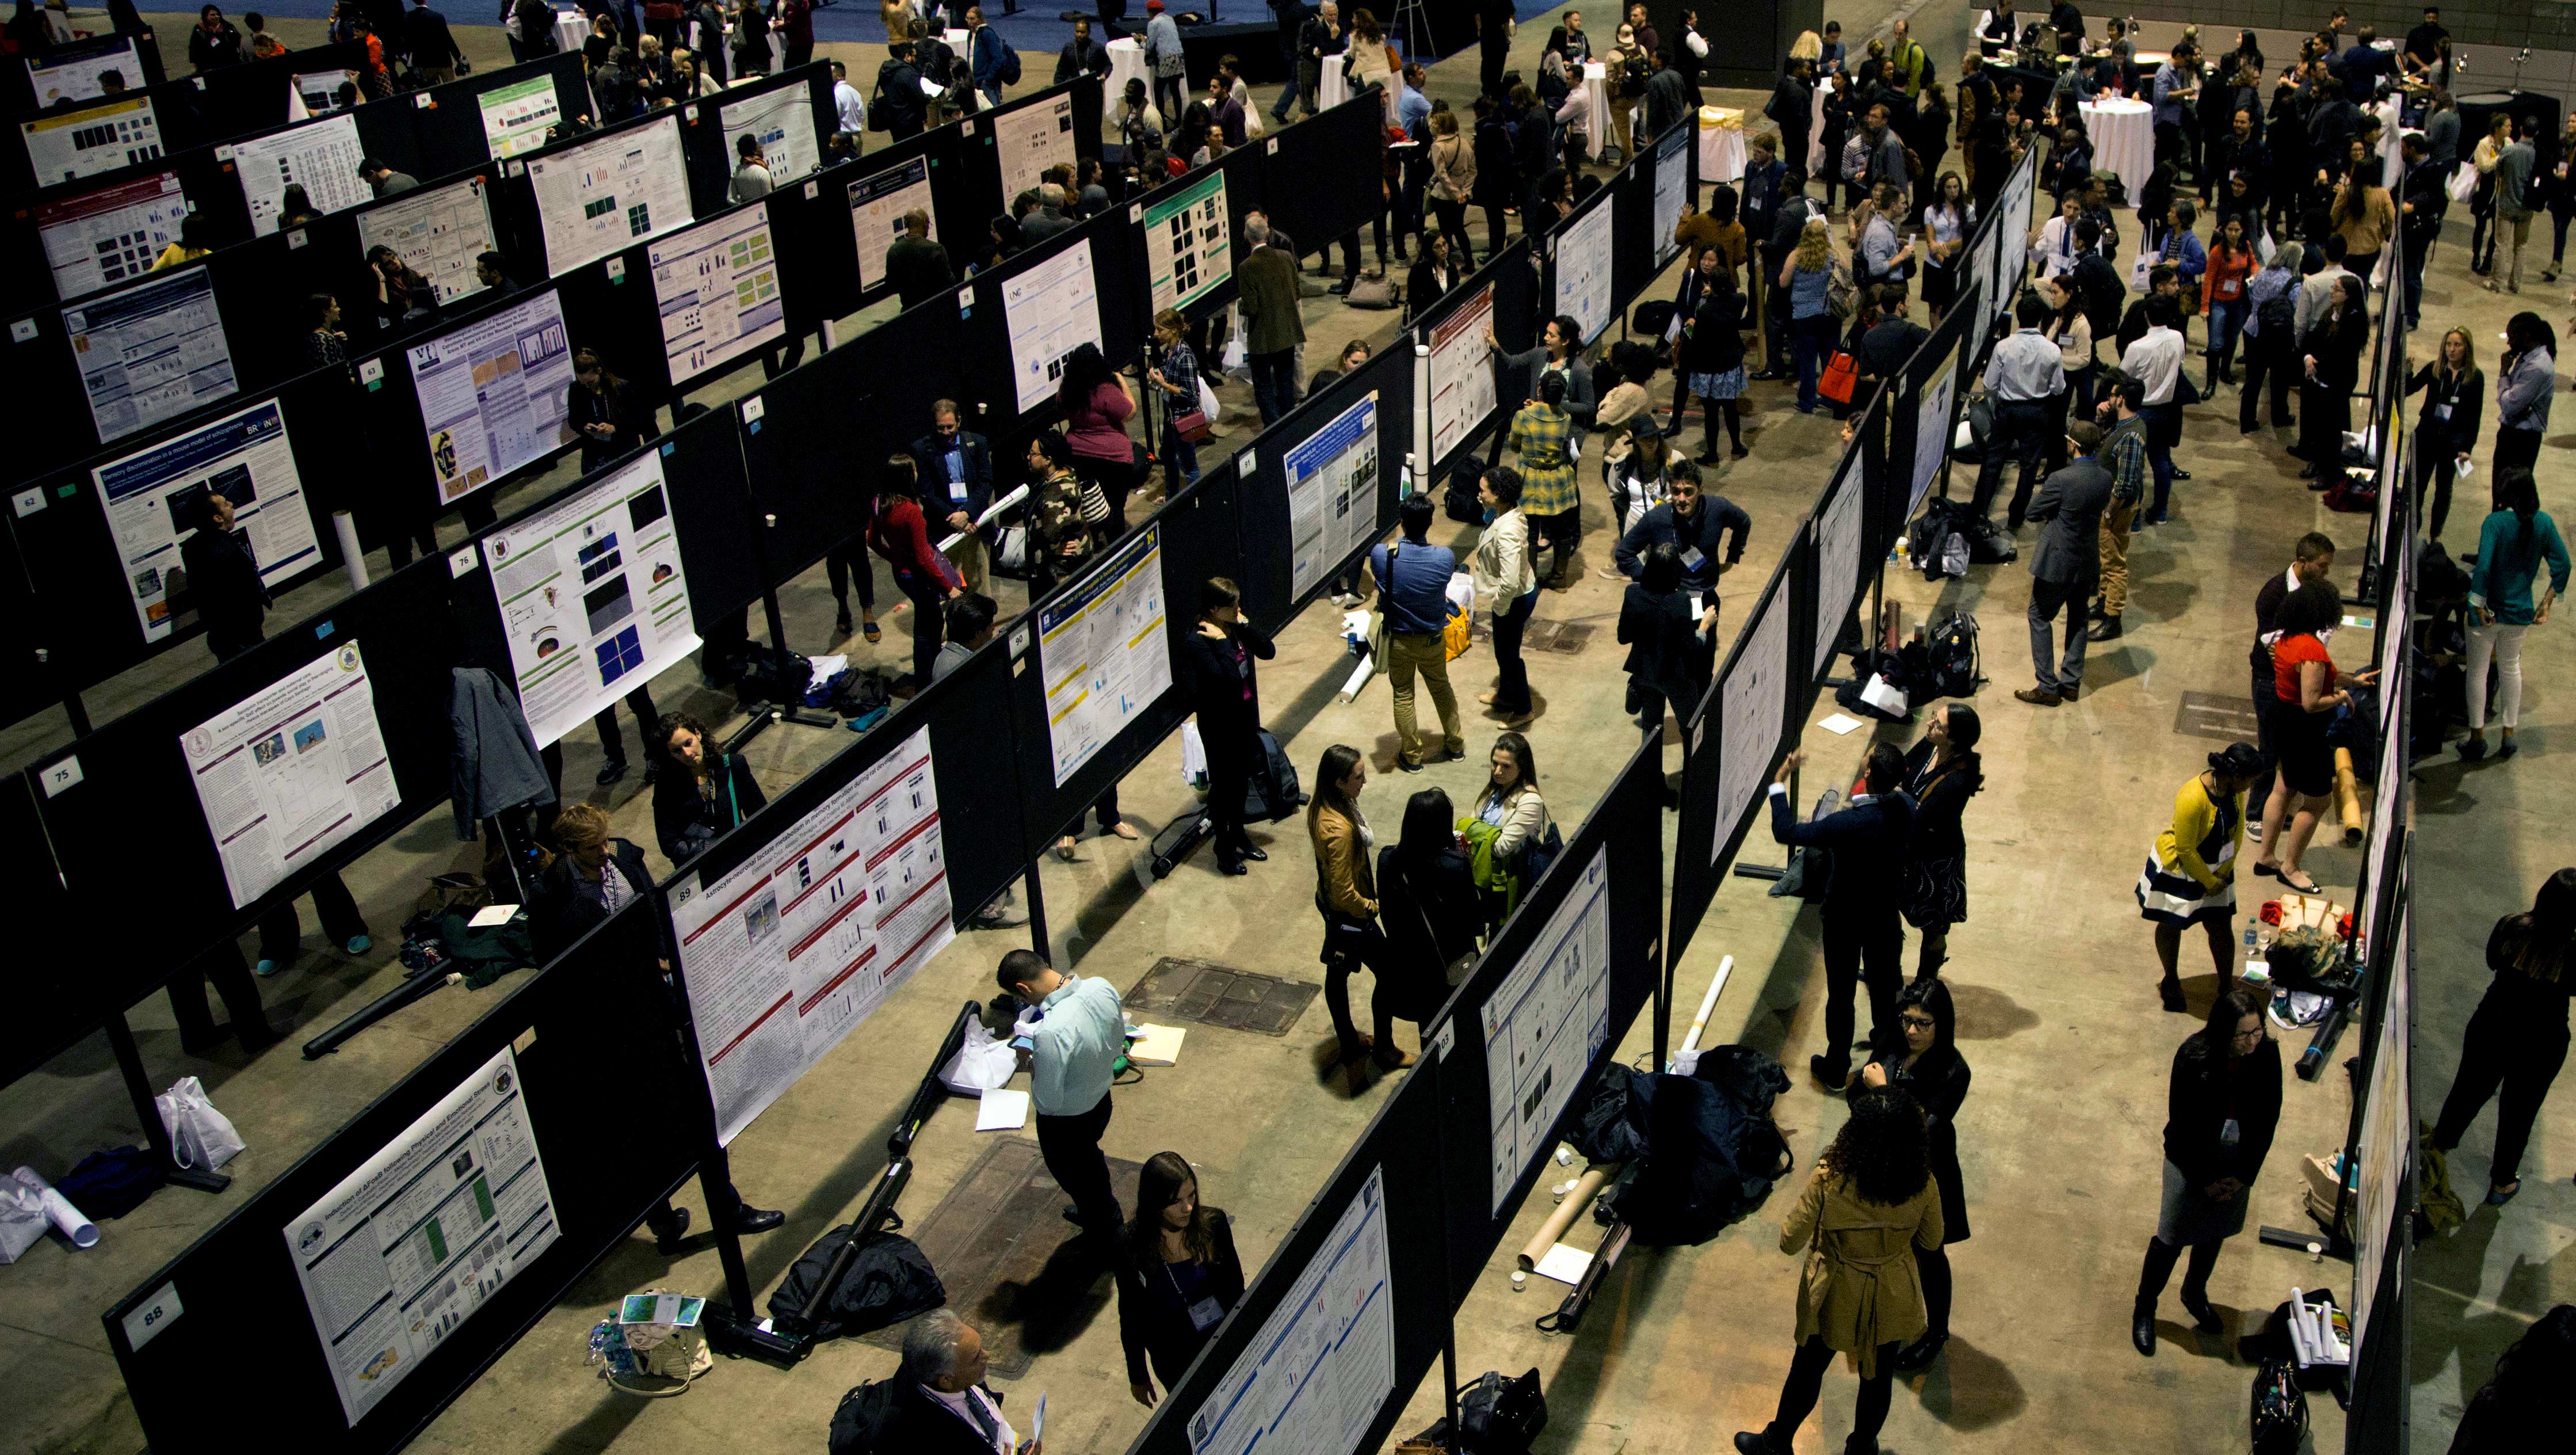 Male and female neuroscientists present their research findings at a conference via posters set up in rows.